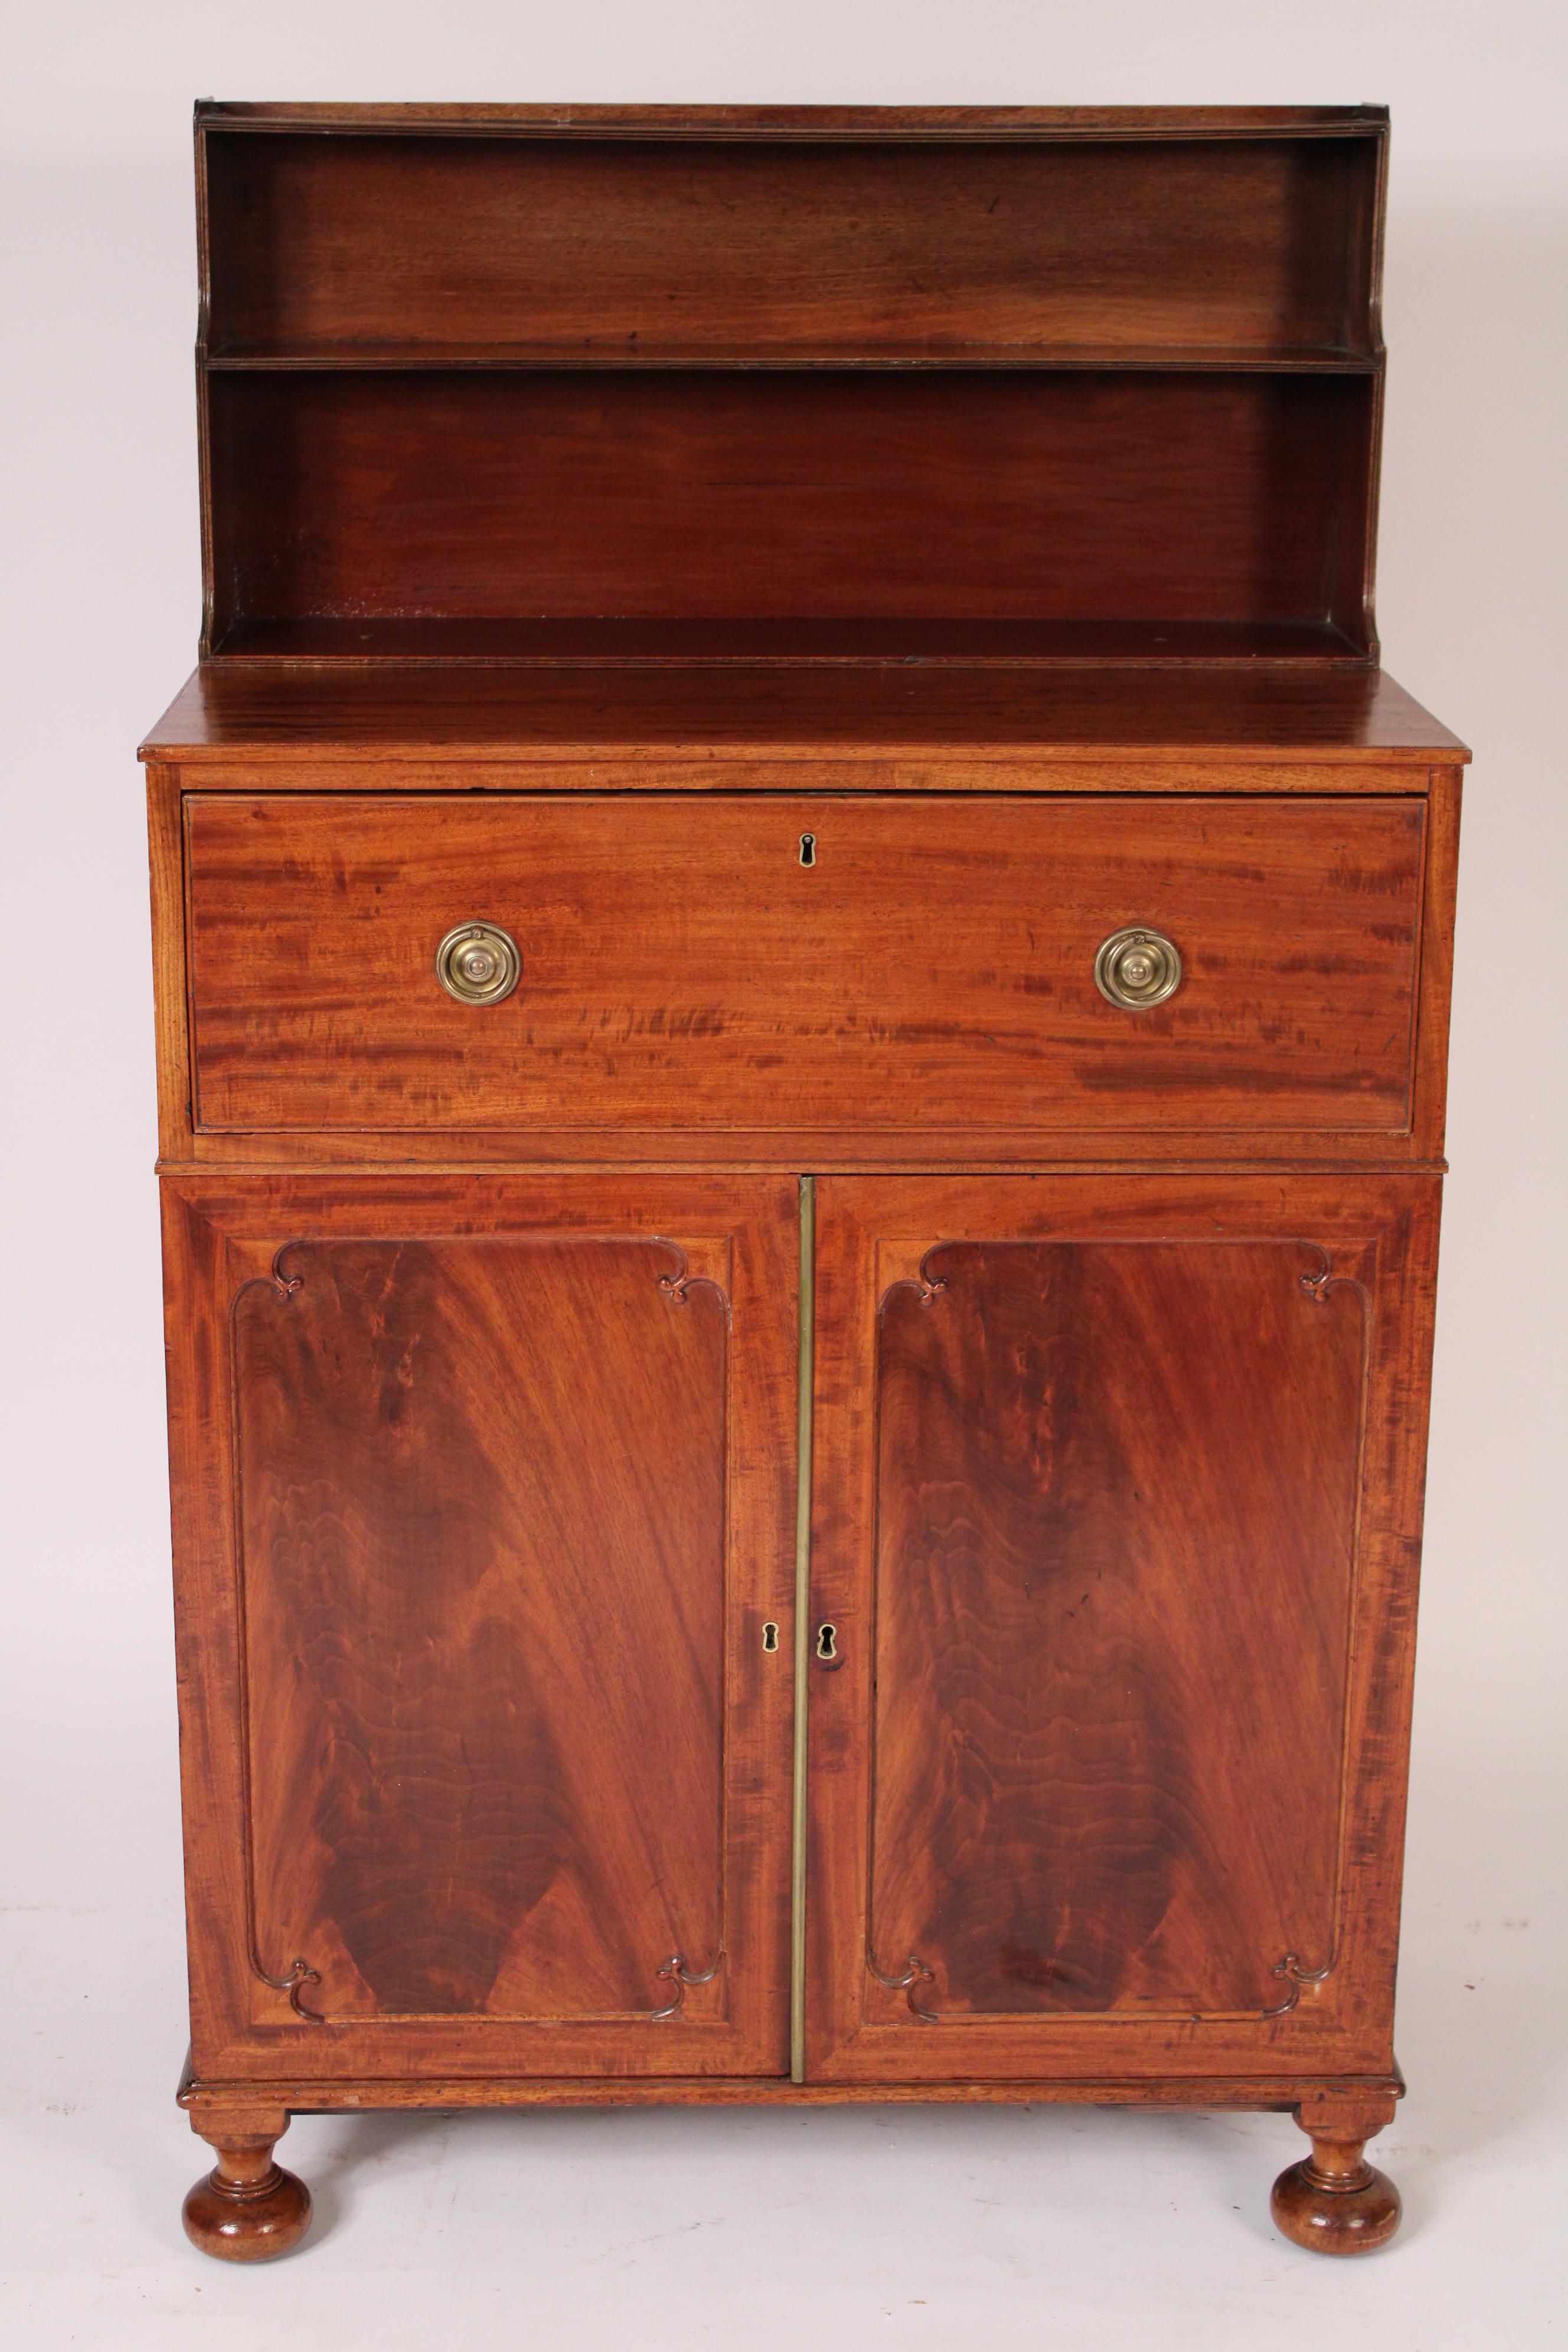 George III mahogany butlers desk, early 19th century. With a two shelf display rack, a plum pudding mahogany top, a plum pudding mahogany drawer that folds down to a leather writing surface, the interior of the desk with central cubby holes flanked